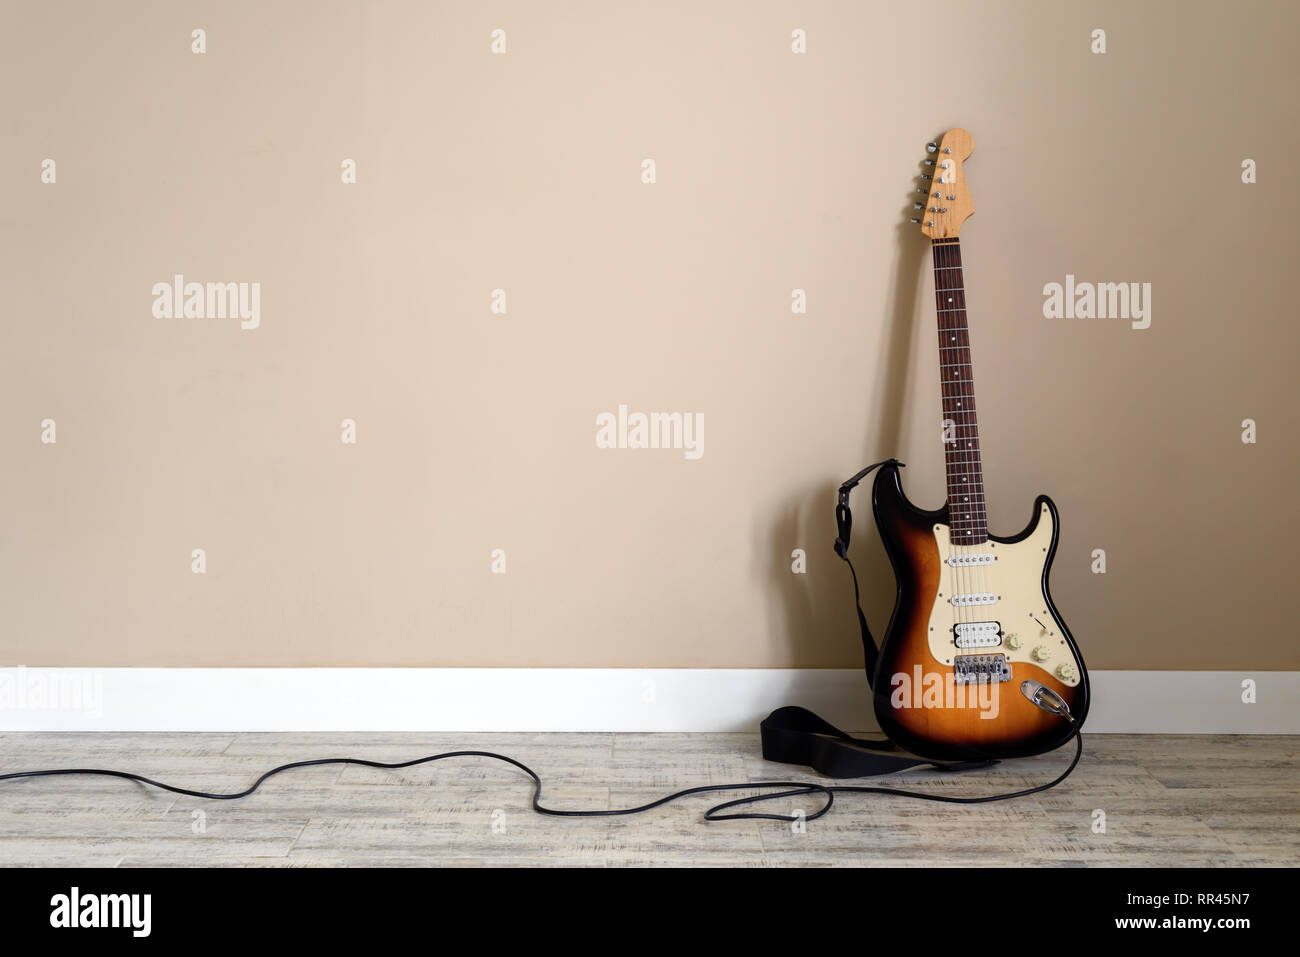 Electro guitar with cable on wall background. Music instrument concept Stock Photo